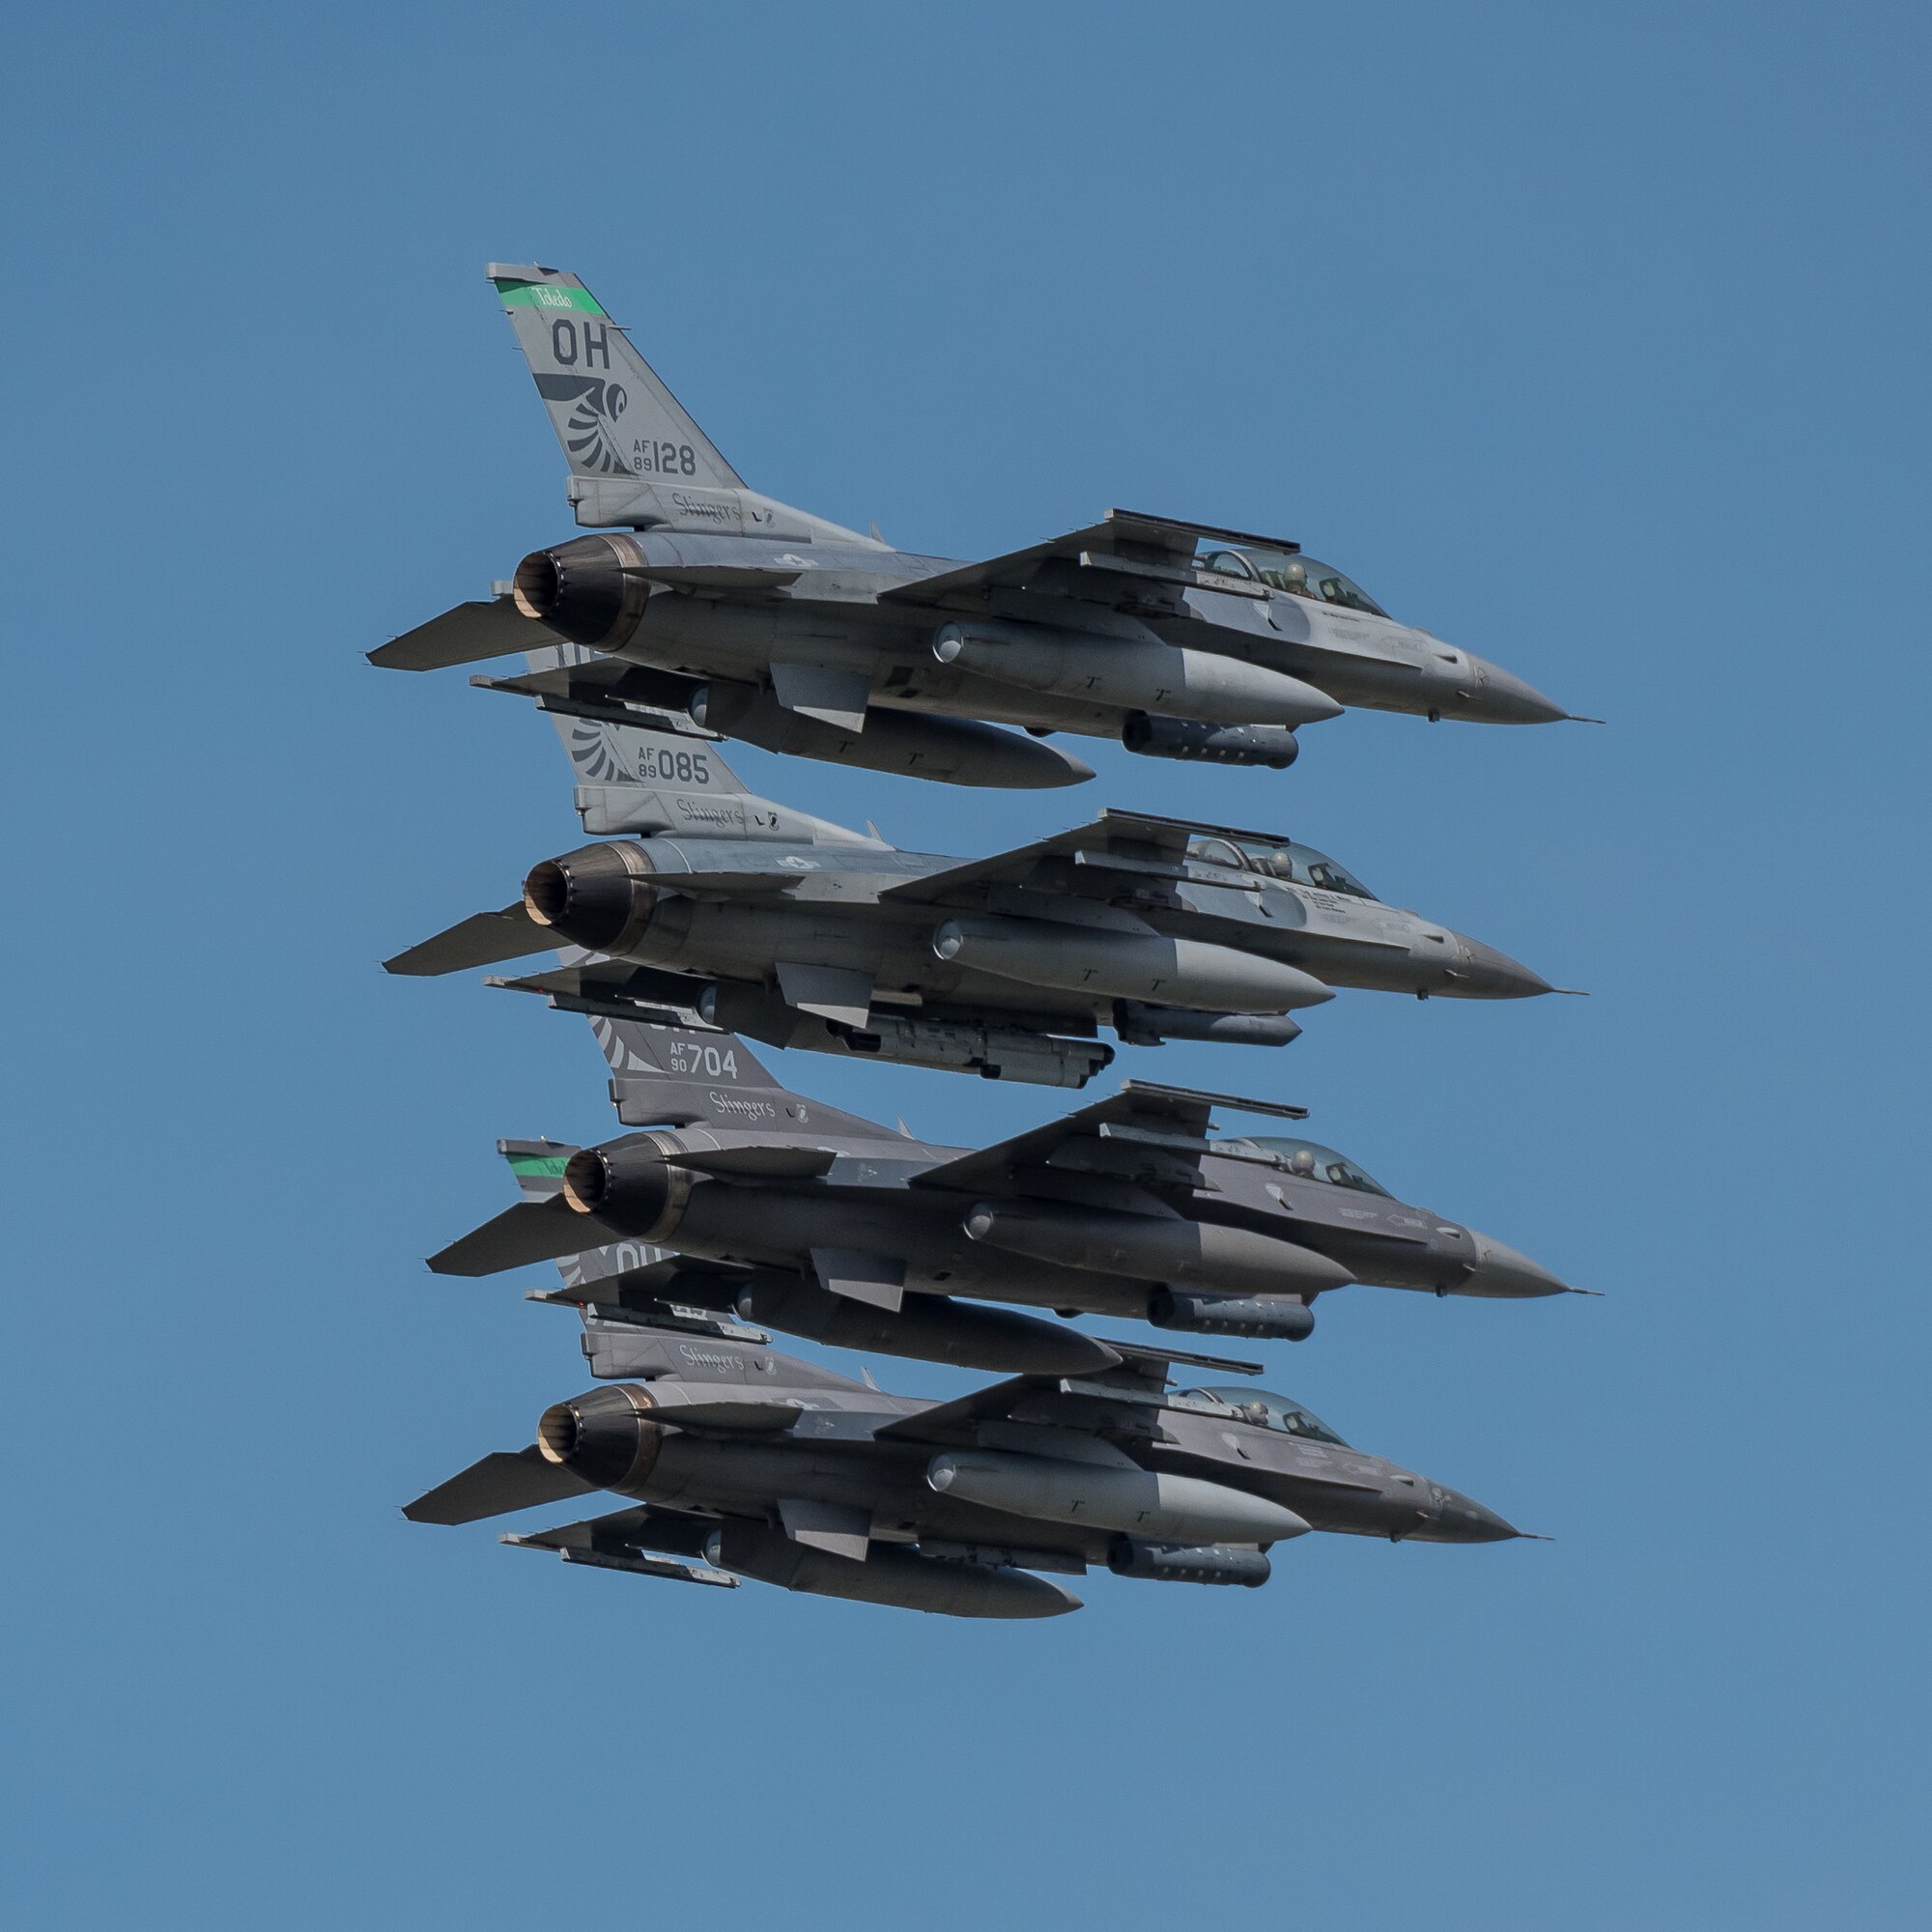 A group of F-16 Falcons from the Ohio Air National Guard’s 180th Fighter Wing steaks over the Ohio River during the annual Thunder Over Louisville airshow in Louisville, Ky., April 13, 2019. Hundreds of thousands of spectators turned out to view the event, which has grown to become one of the largest single-day air shows in North America. (U.S. Air National Guard photo by Dale Greer)